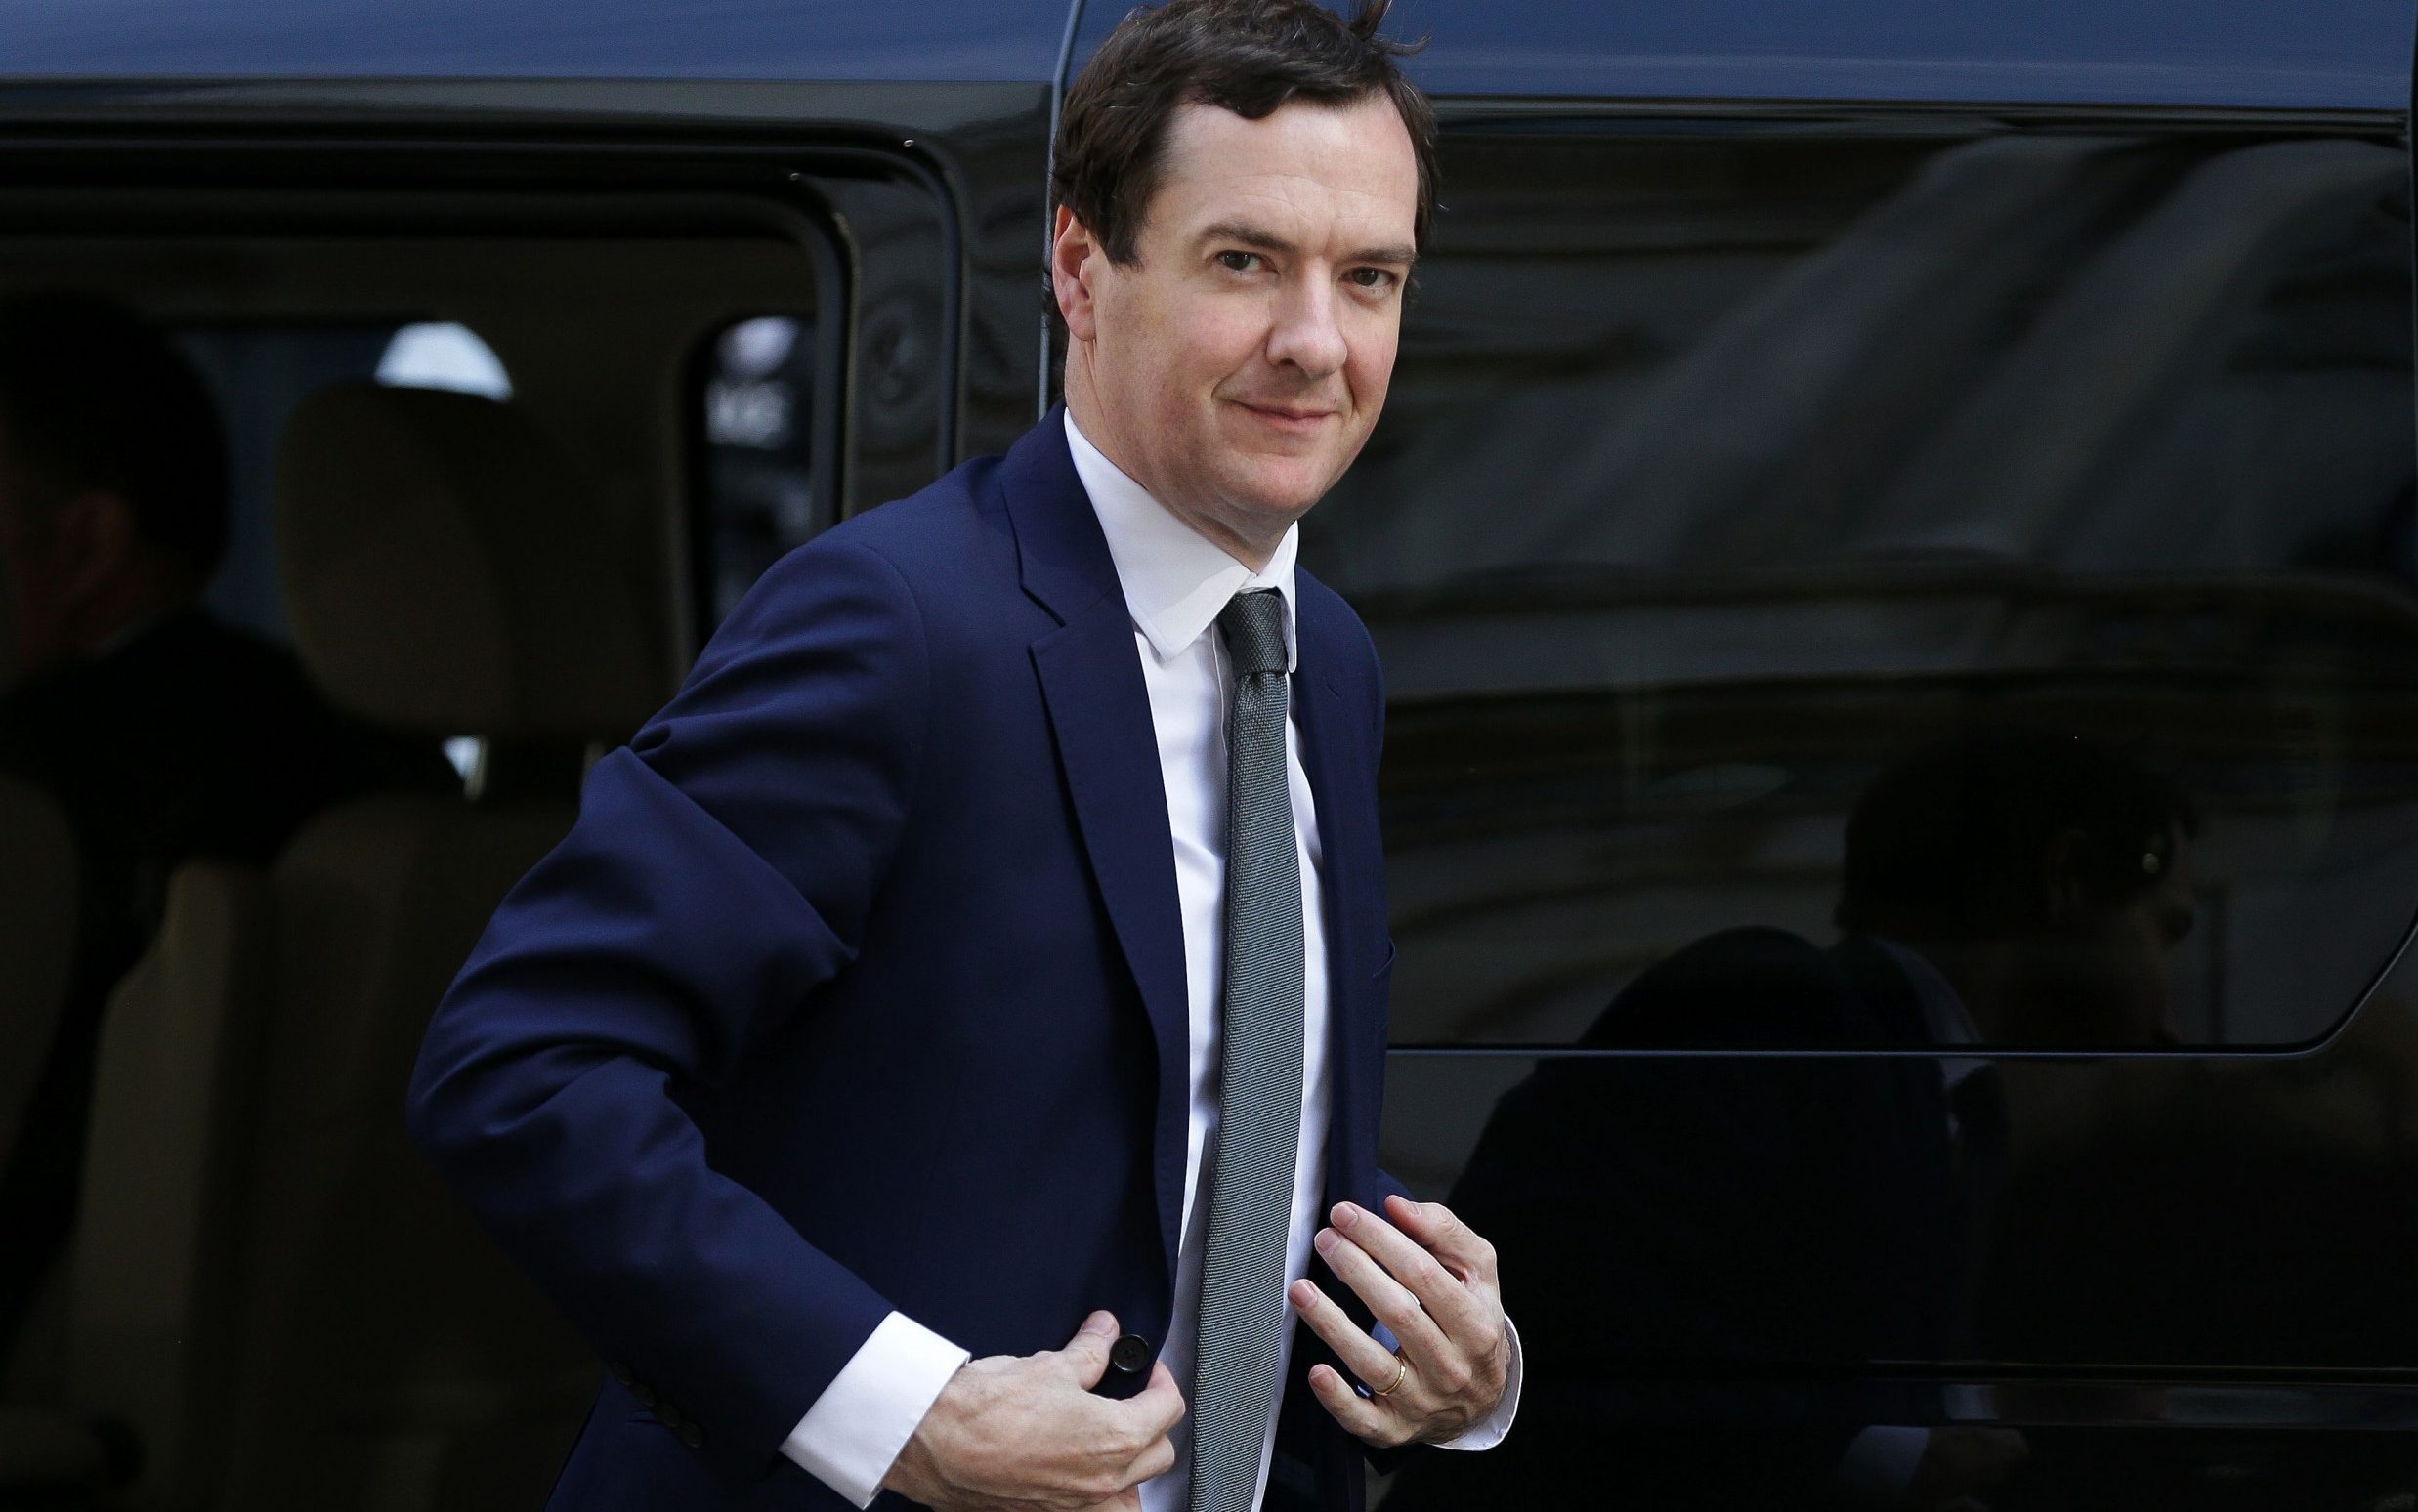 taxpayers brace for £100bn money-printing bill – as george osborne says it’s ‘not my responsibility’